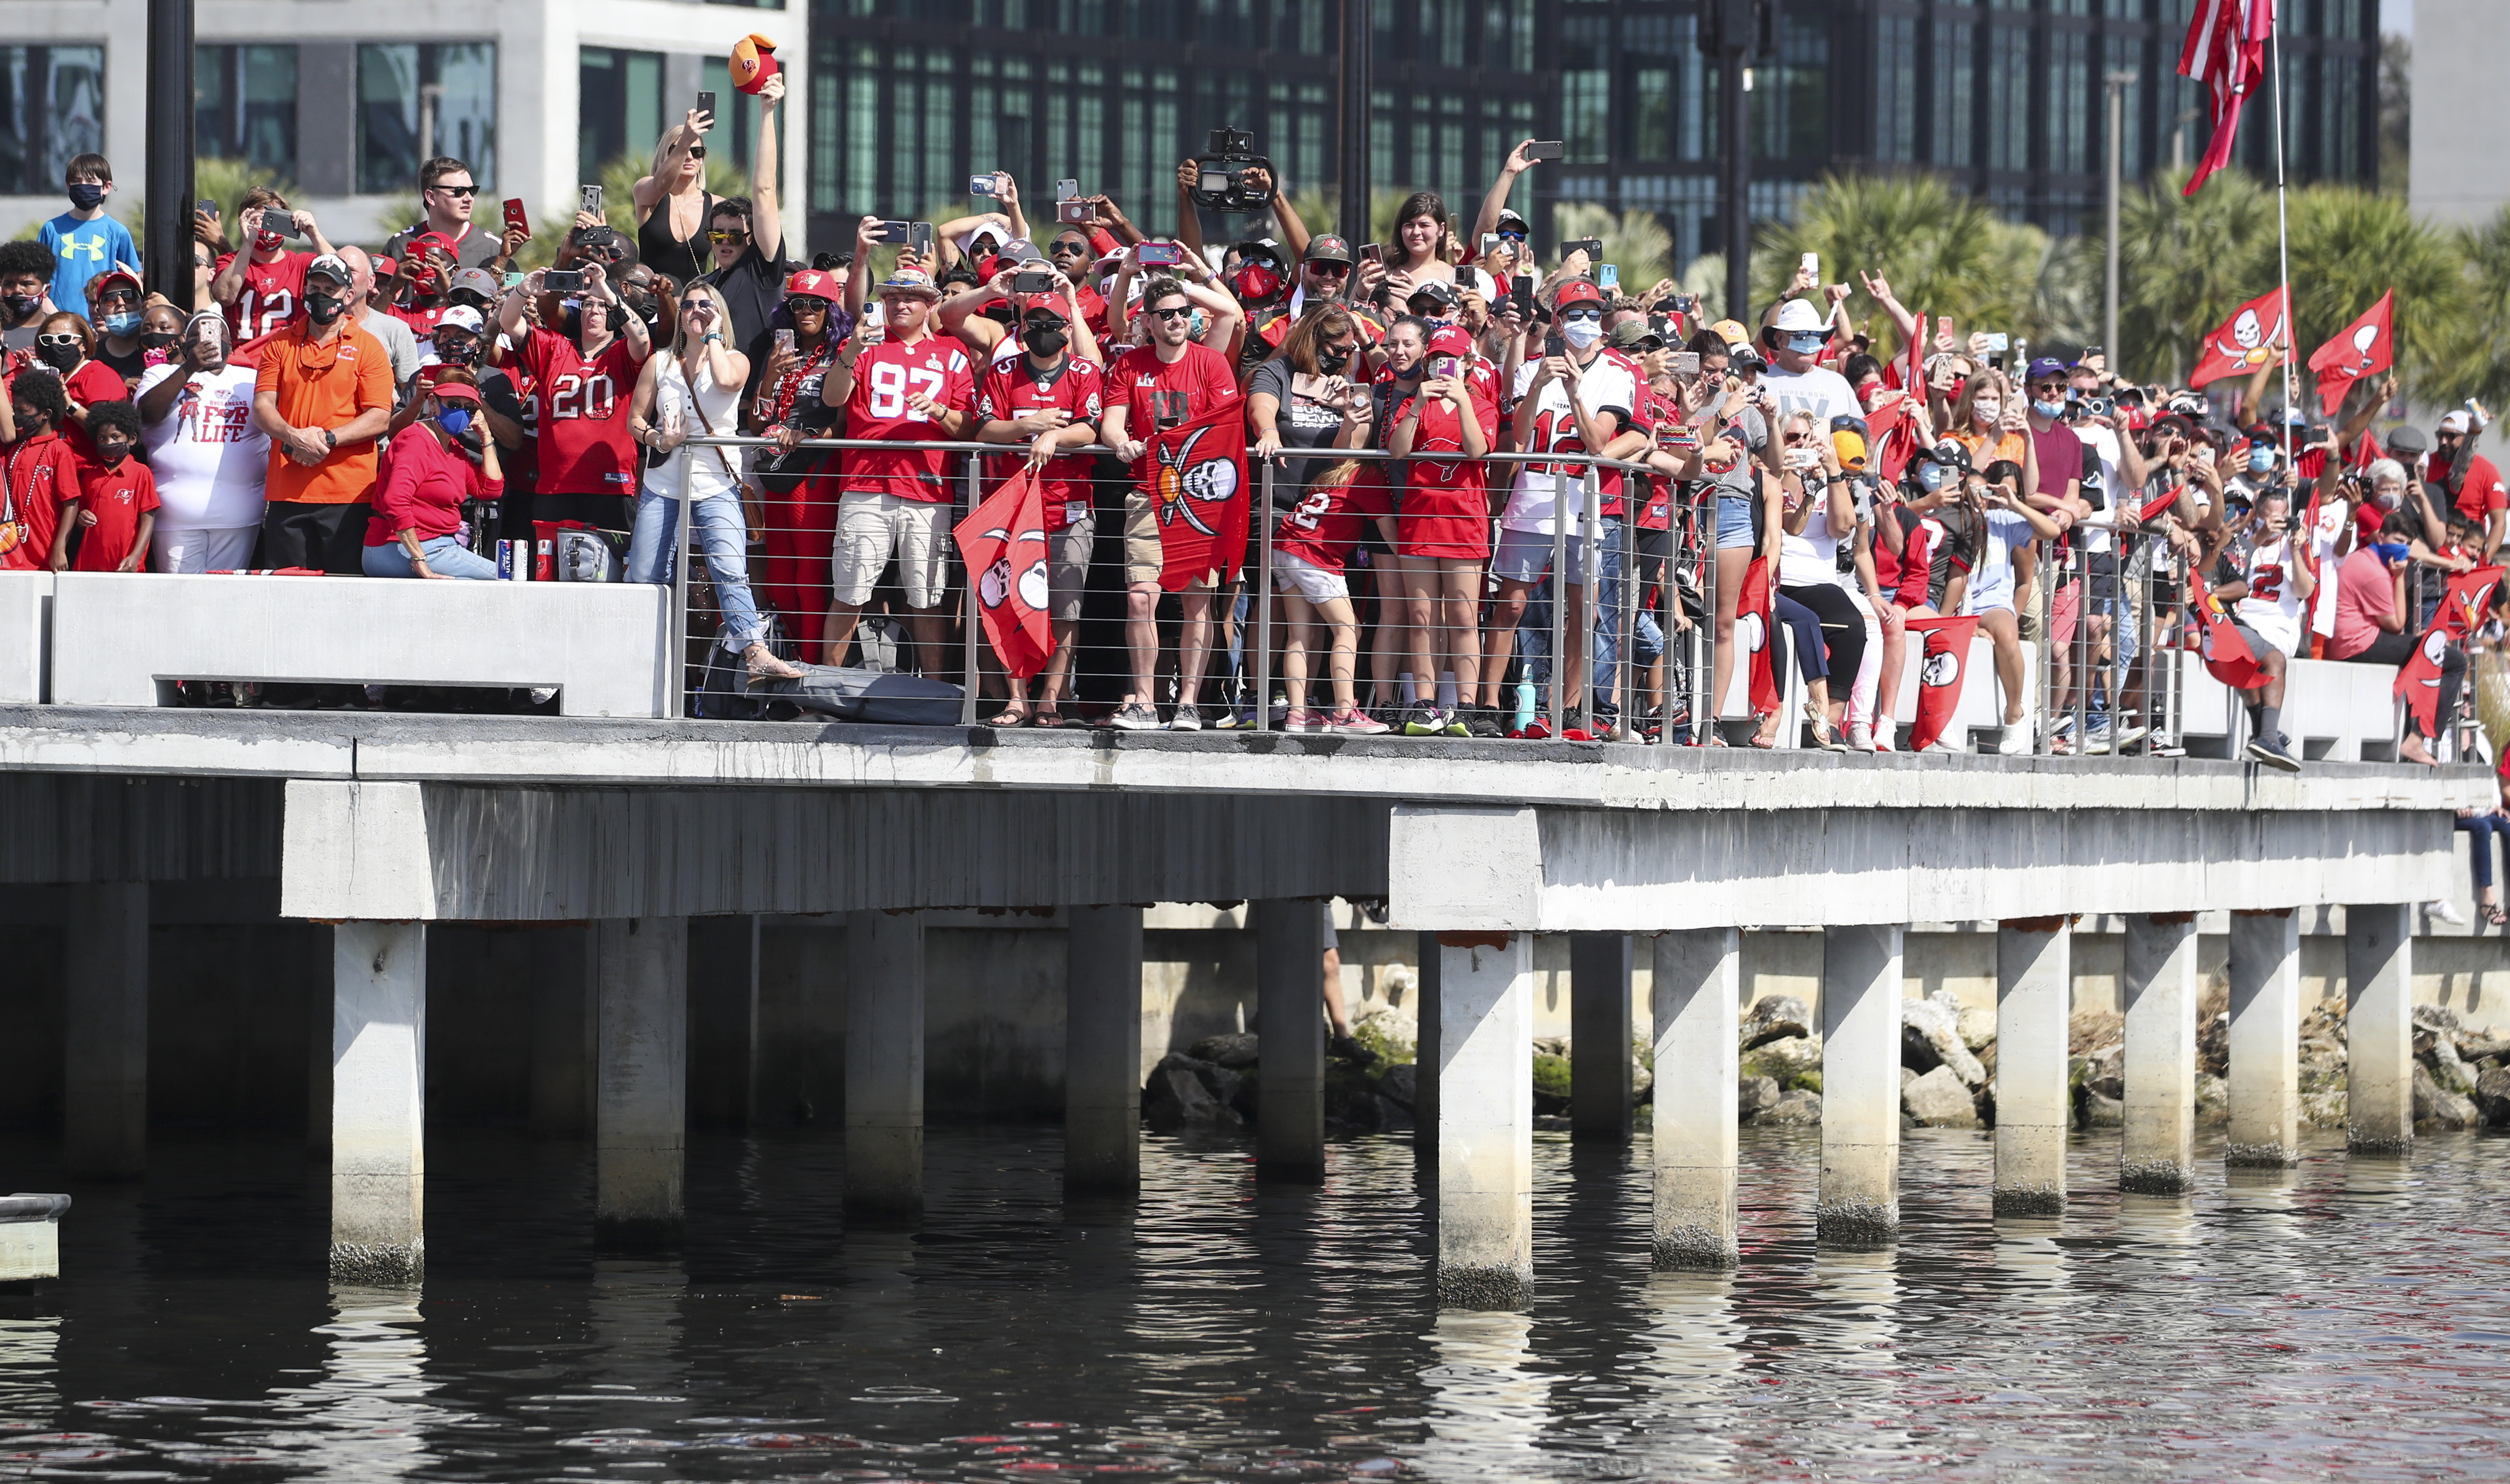 Born out of necessity, boat parade has become emblematic of Tampa Bay